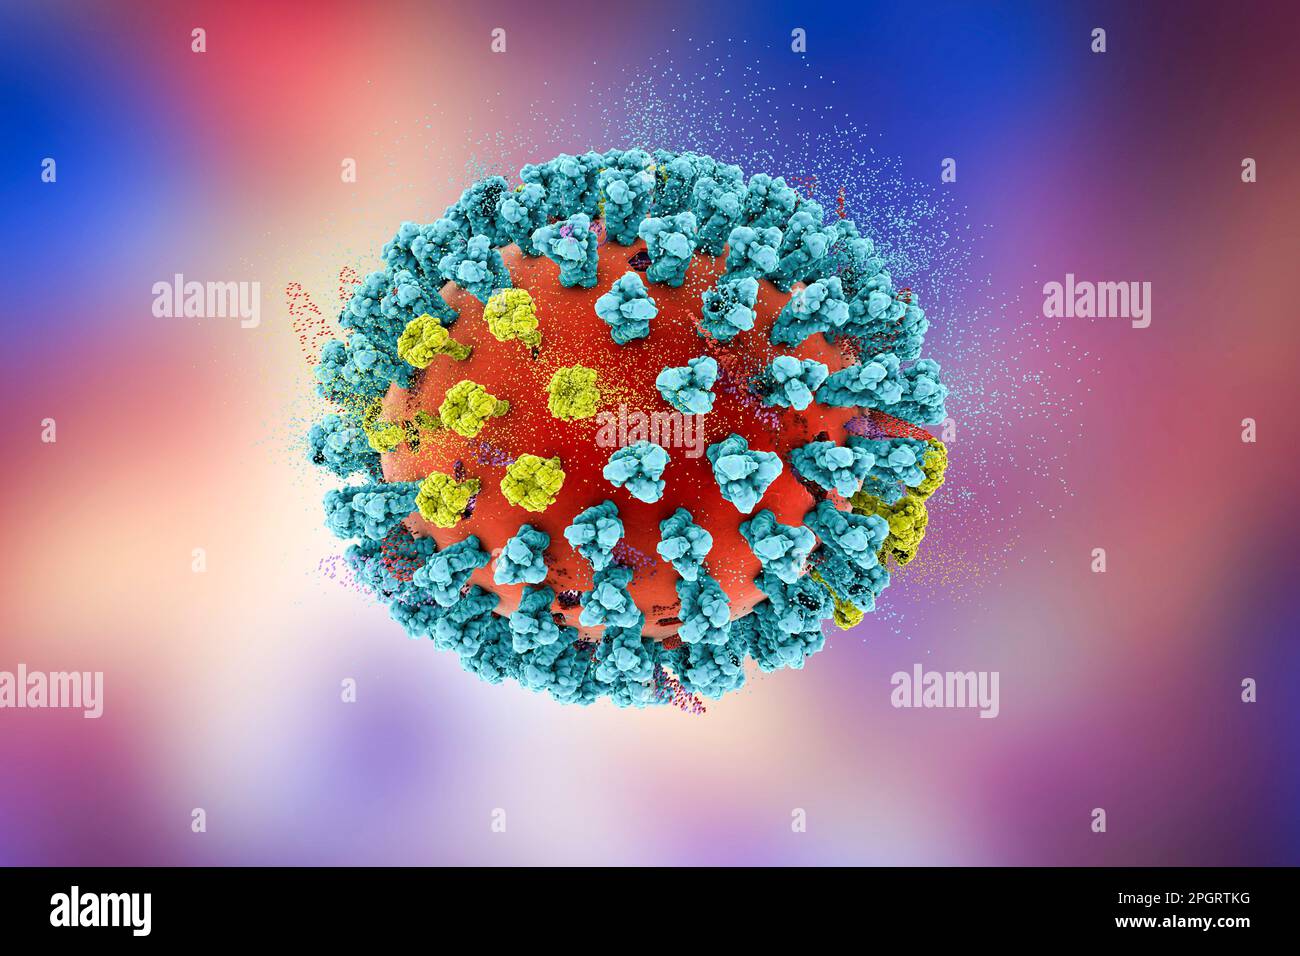 Destruction of bird flu virus. 3D illustration of an avian influenza H5N8 virus particle. Conceptual image for influenza treatment and prevention. Thi Stock Photo